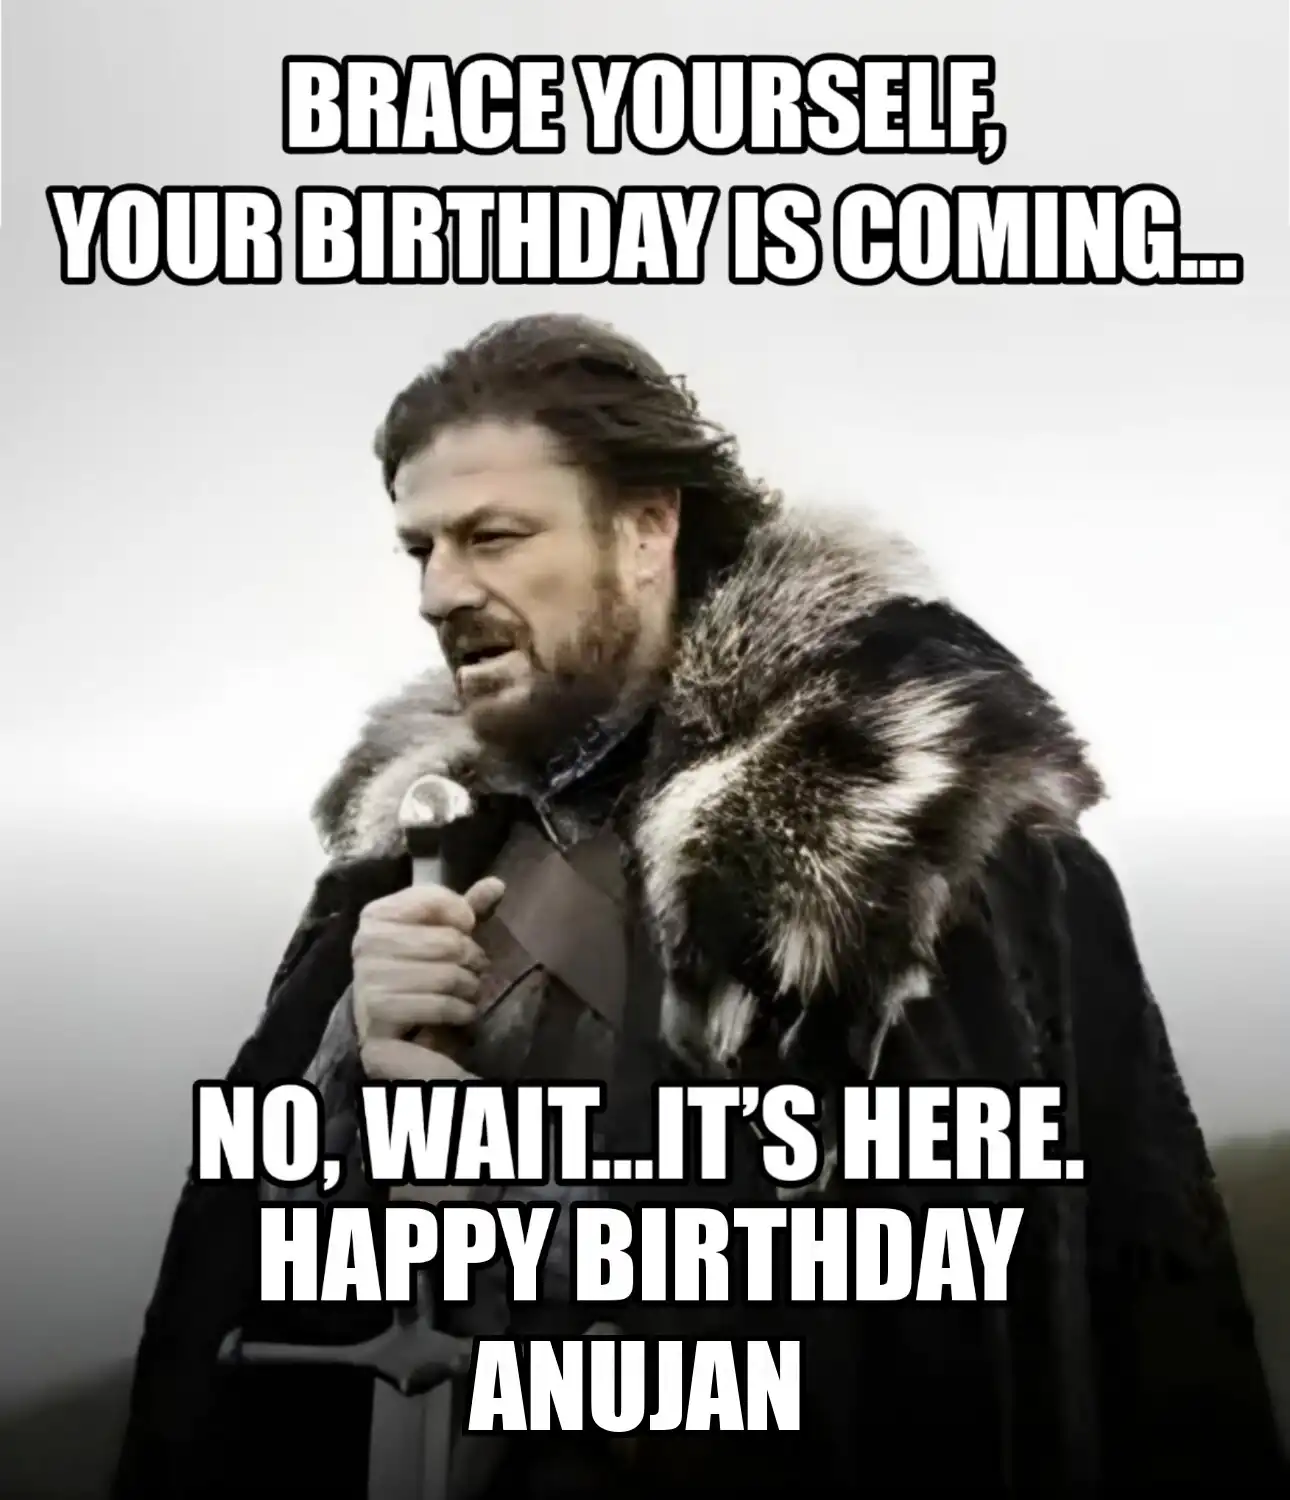 Happy Birthday Anujan Brace Yourself Your Birthday Is Coming Meme